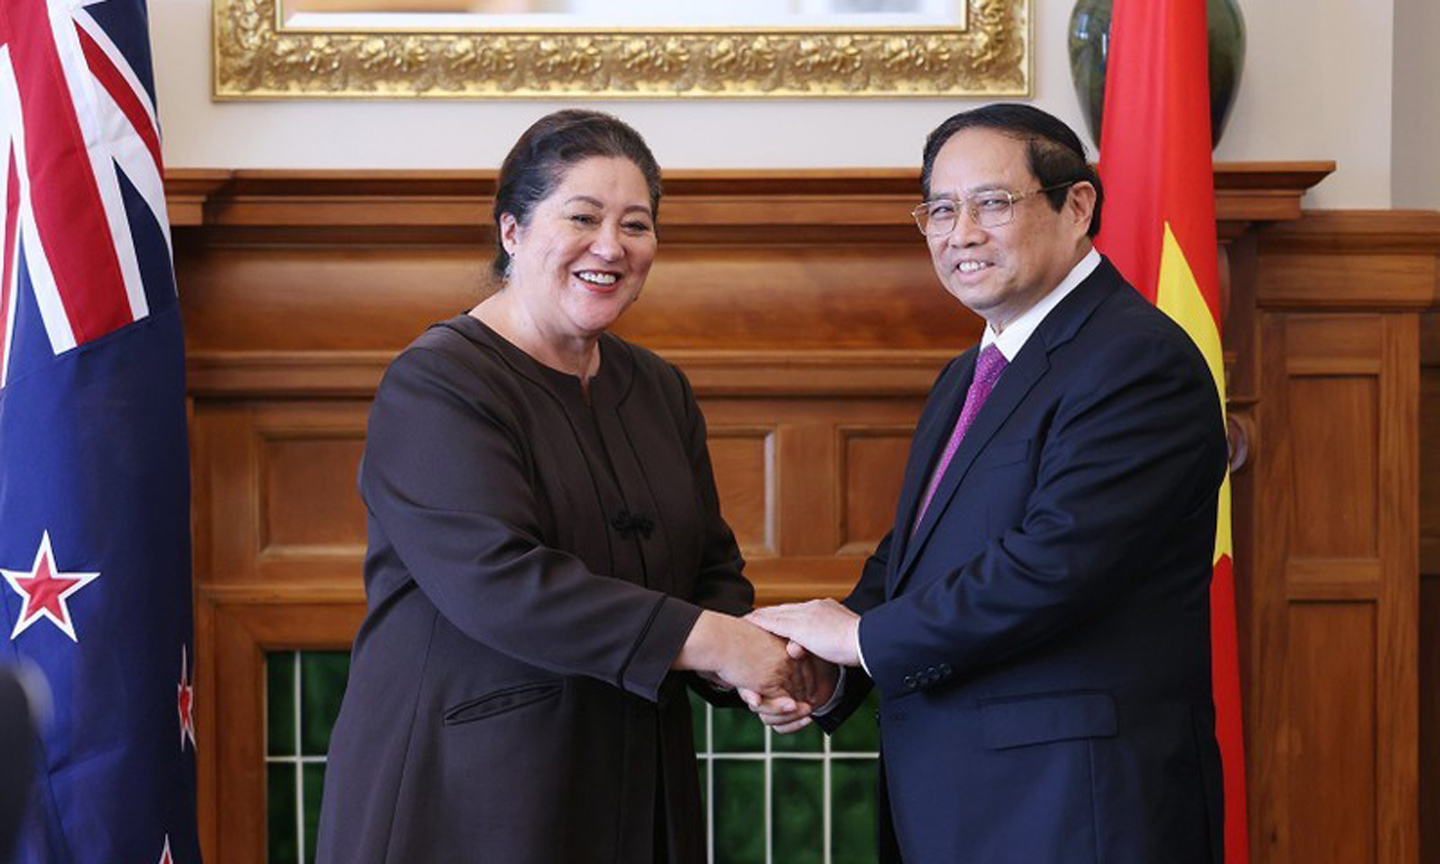 Prime Minister Pham Minh Chinh and Governor-General of New Zealand Dame Cindy Kiro. (Photo: VNA).